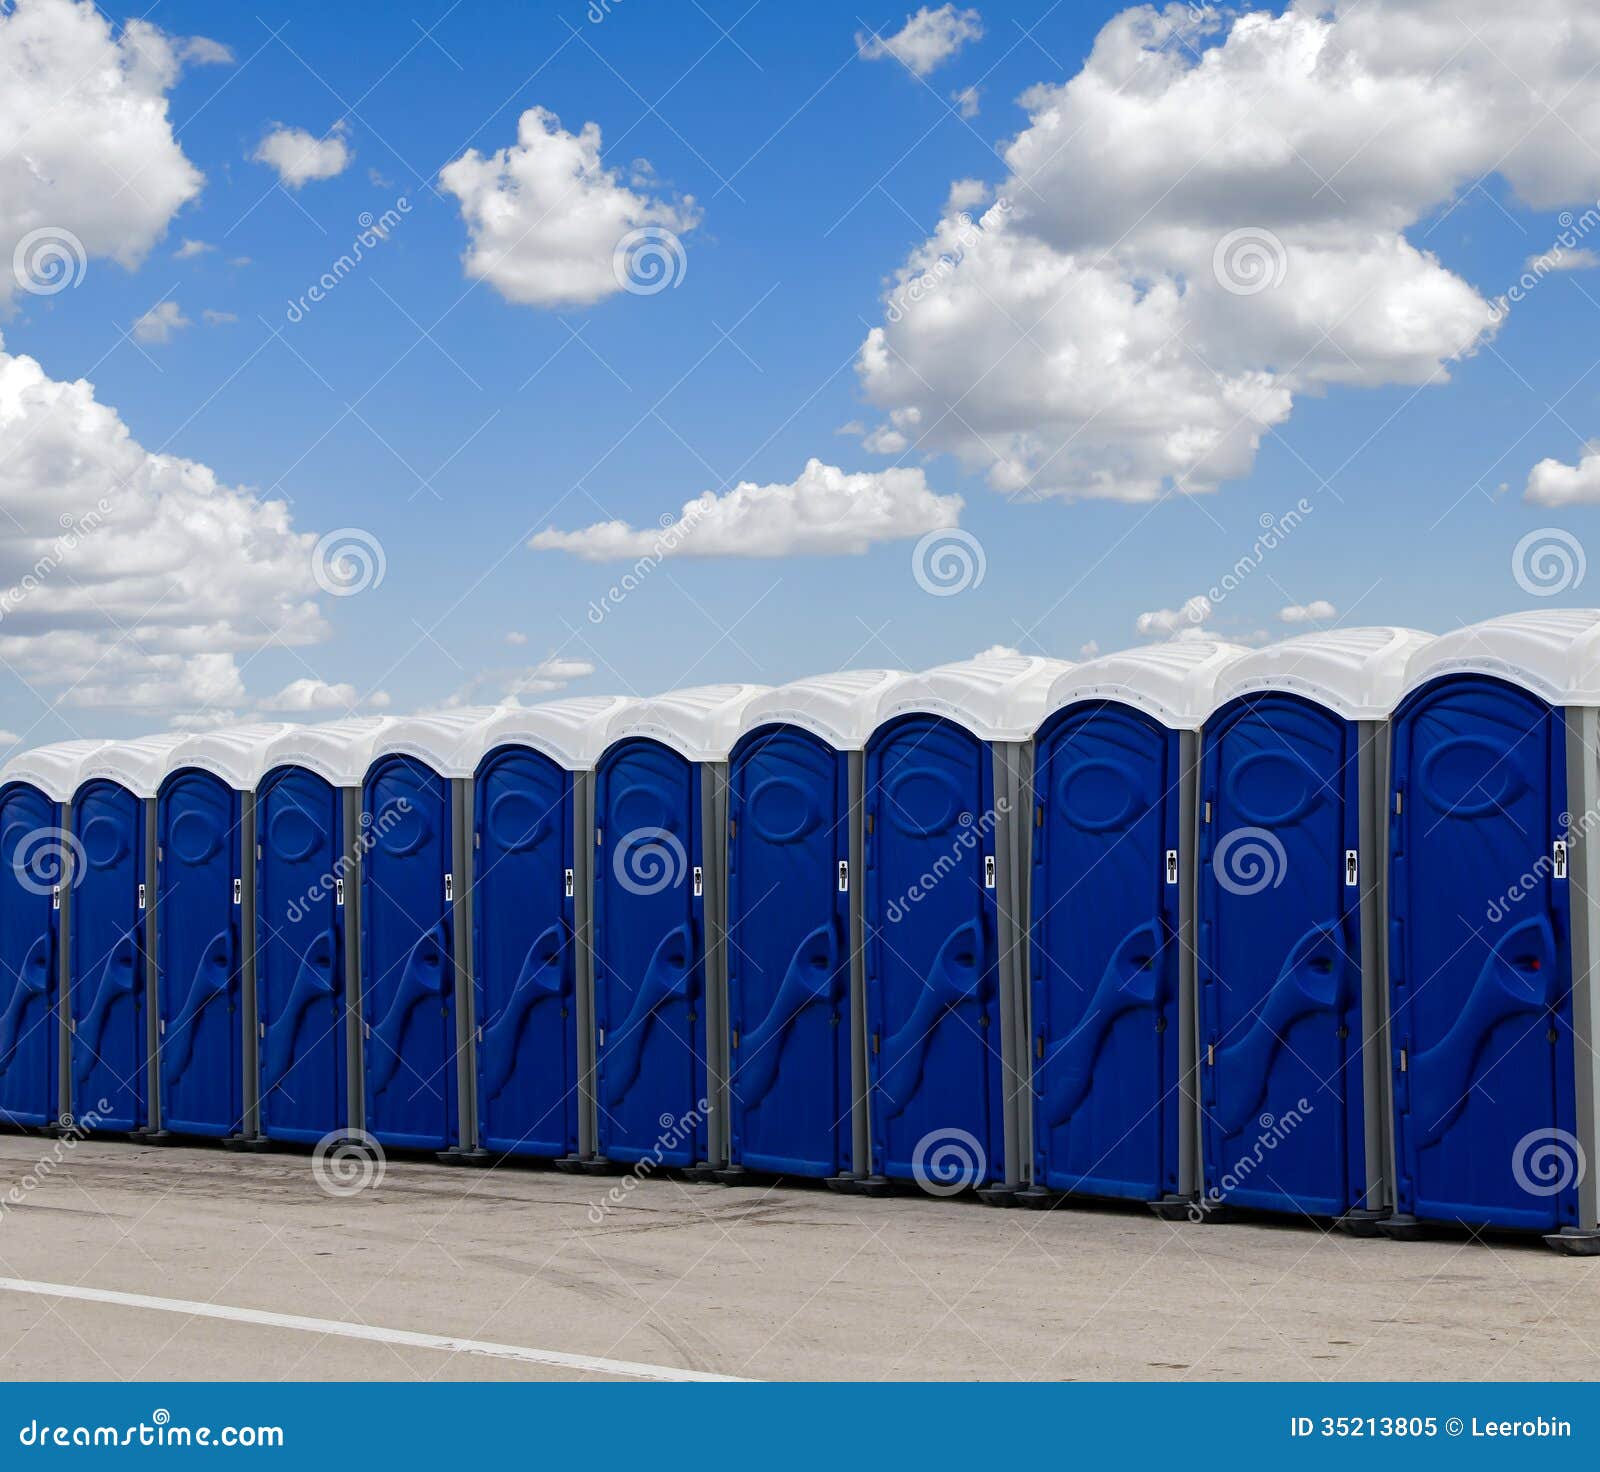 a row of blue portable toilets